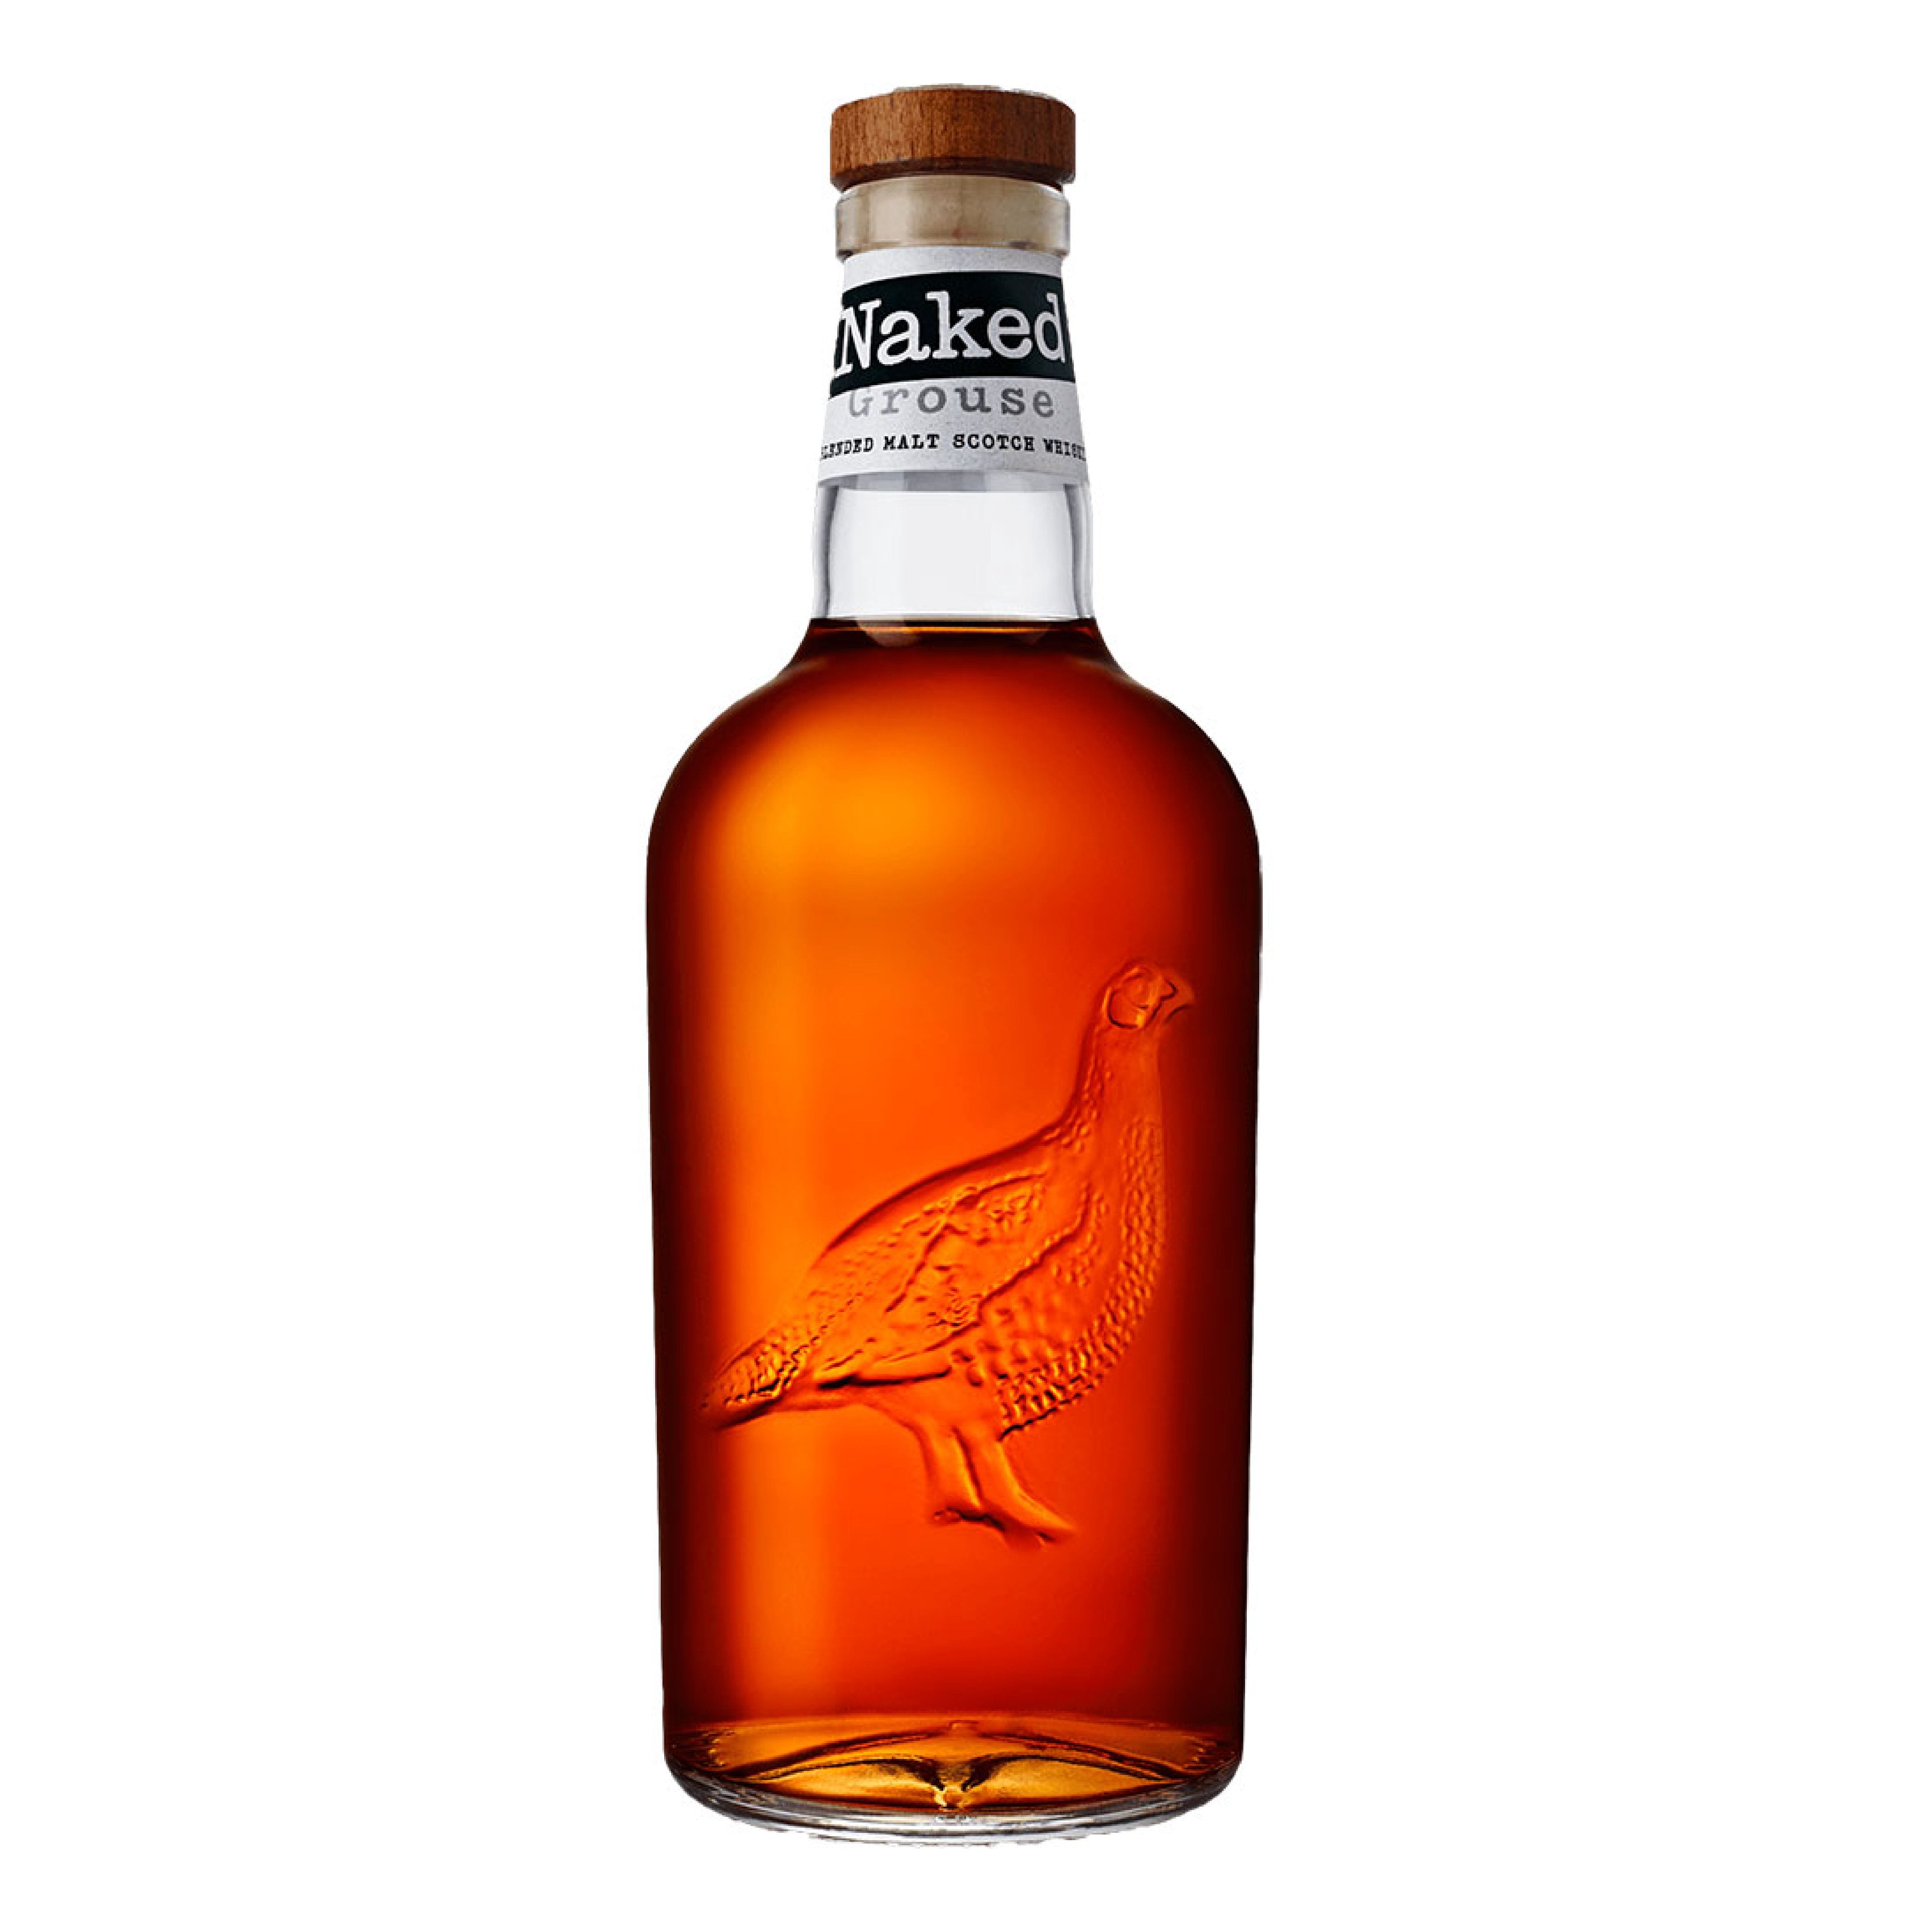 The Naked Grouse 700ml 01